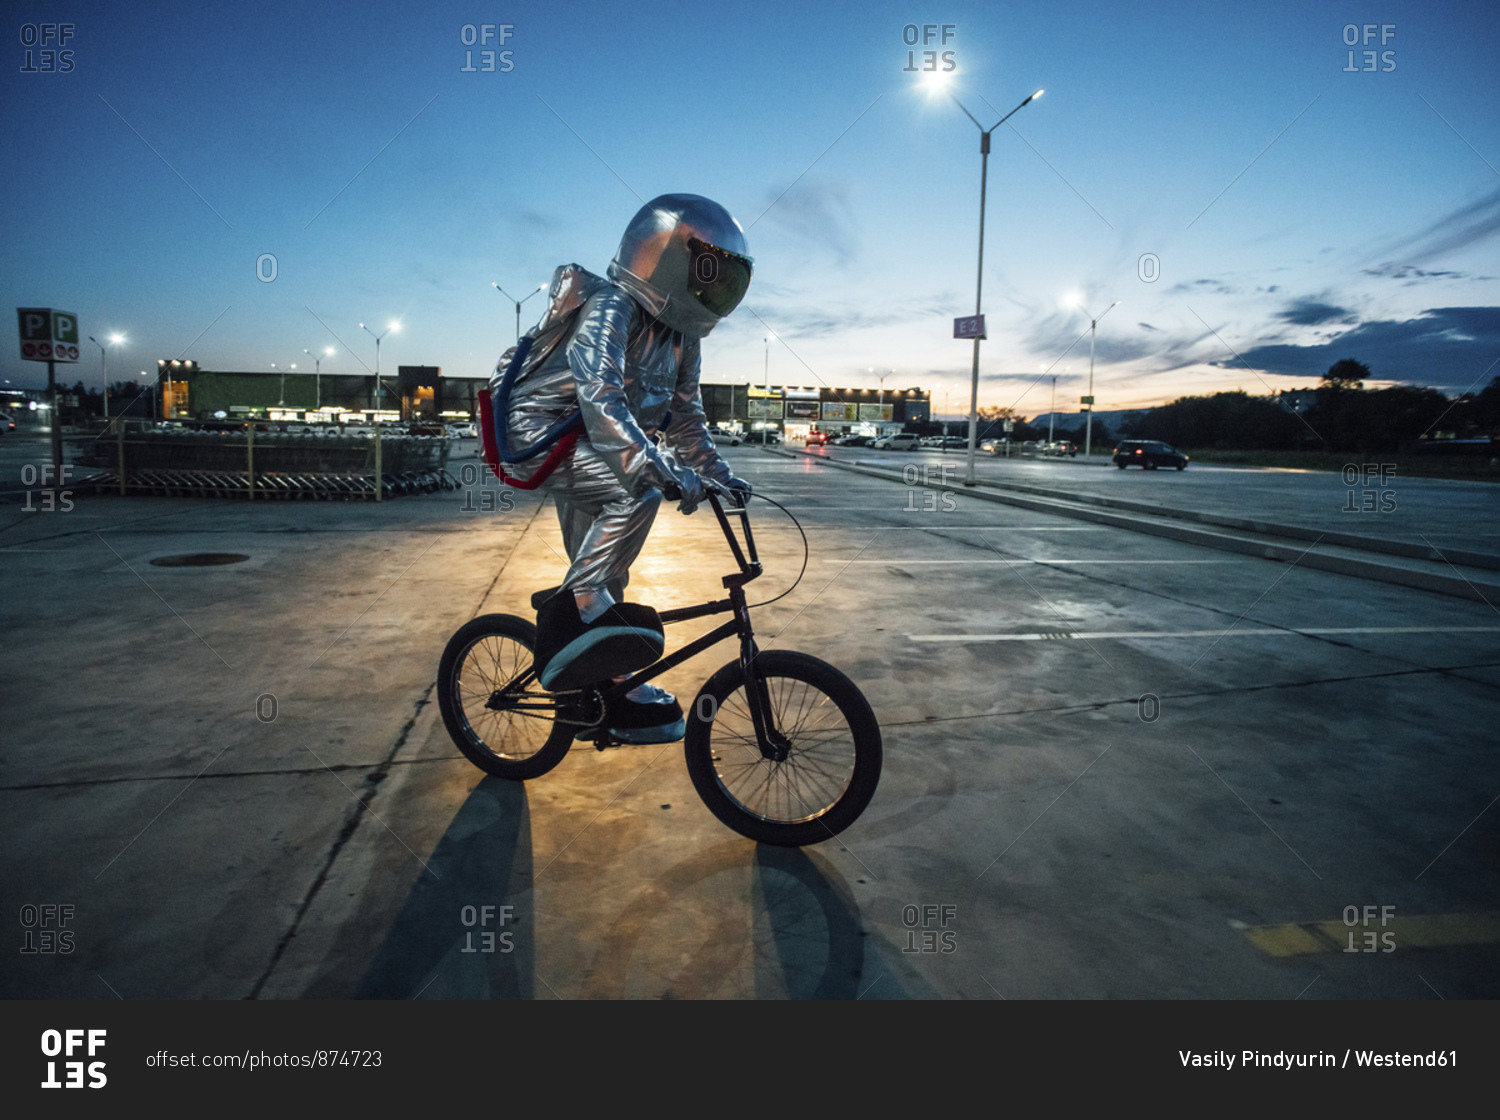 Spaceman in the city at night on parking lot riding bmx bike